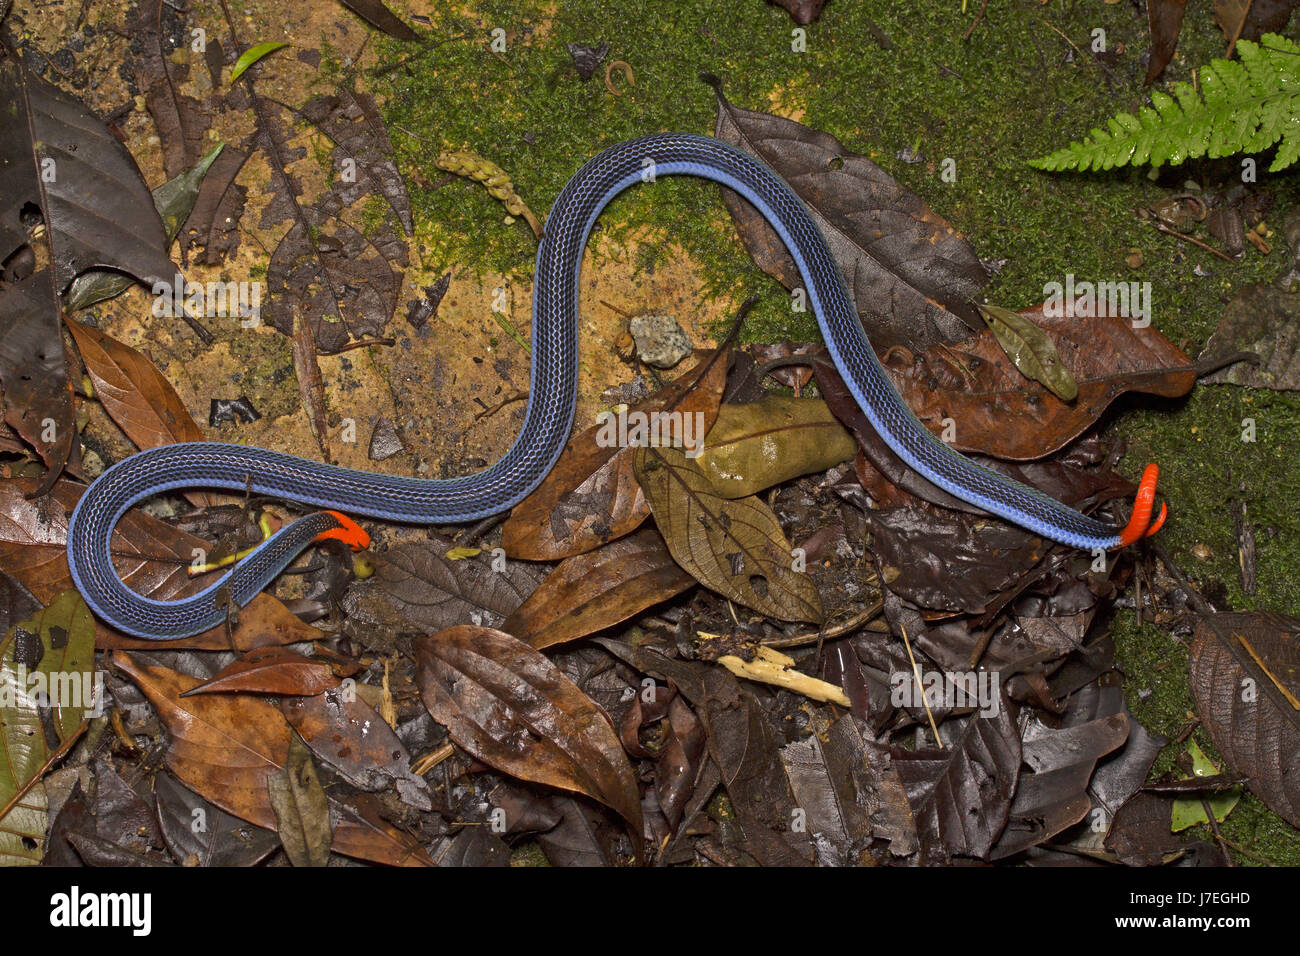 Blue Coral Snake Stock Photo